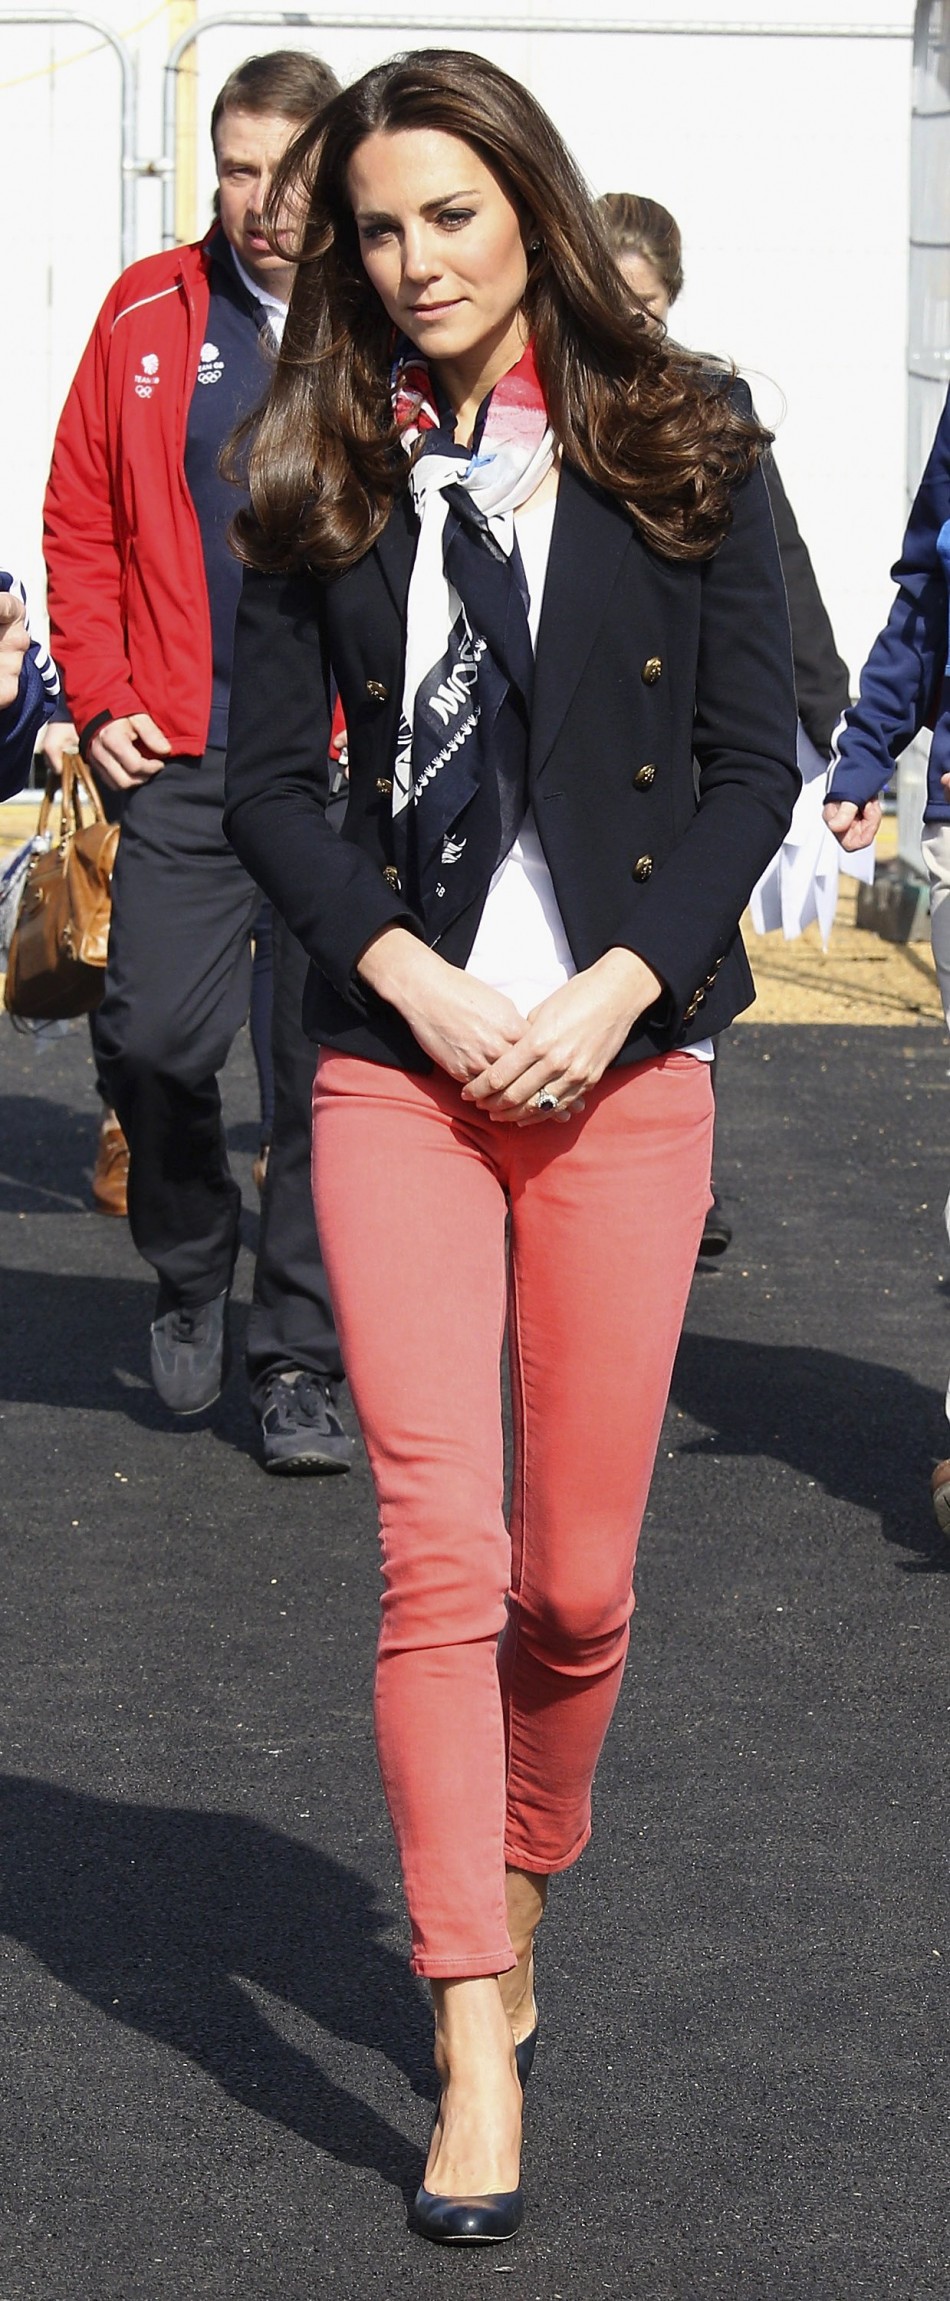 Britains Catherine, Duchess of Cambridge wears the Team GB official supporters scarf for London 2012, during her visit to the Olympic Park in London